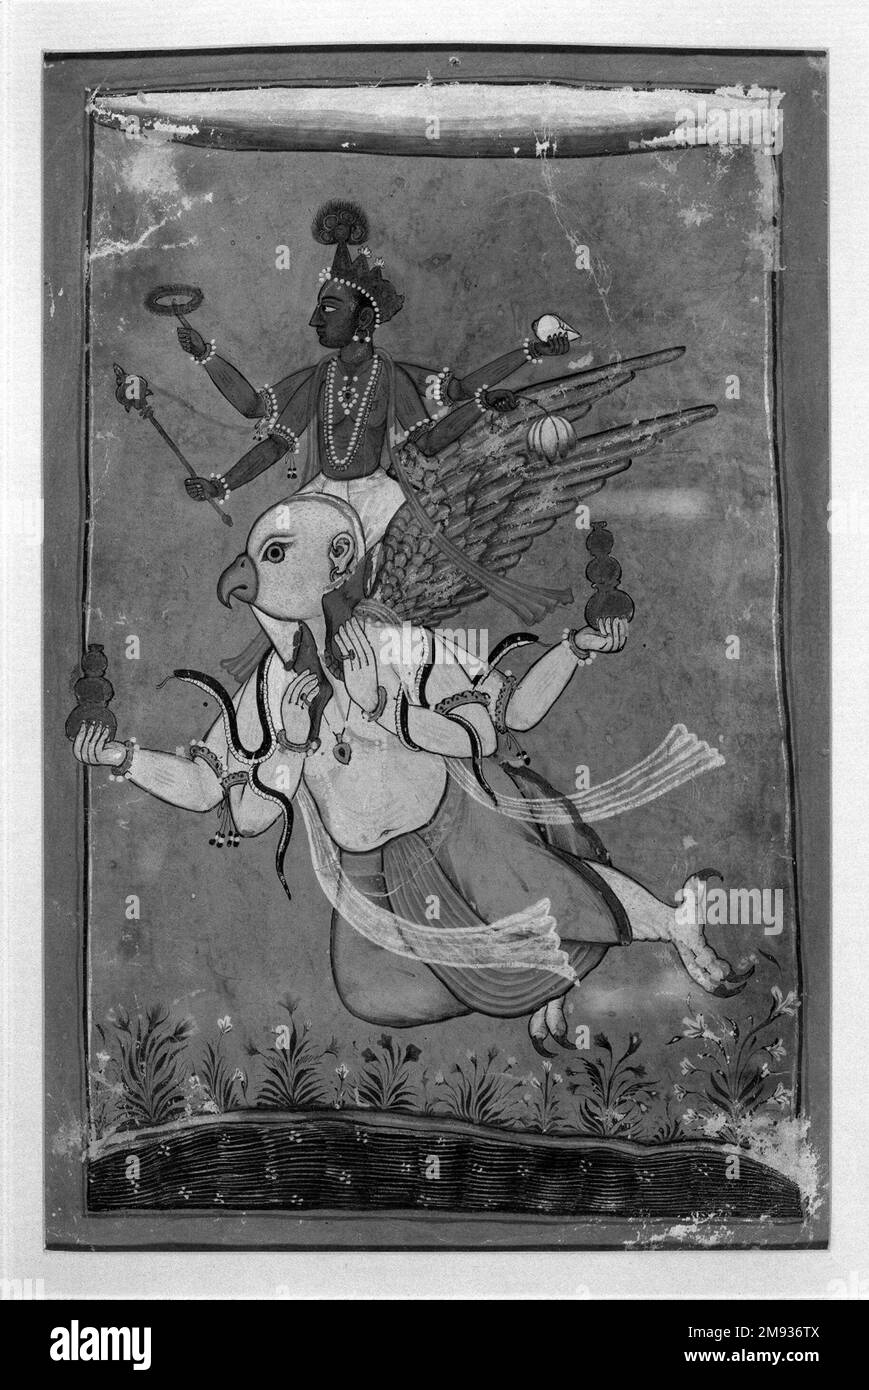 Vishnu on Garuda Indian. Vishnu on Garuda, ca. 1725 or earlier. Opaque watercolor, silver, and gold on paper, sheet: 8 11/16 x 5 3/4 in. (22.1 x 14.6 cm).  The Hindu god Vishnu resides in a heavenly realm, but when humankind requires his help, he descends to earth to save the day, riding on the back of a part-man, part-eagle creature named Garuda. Although Vishnu’s blue color is not explained in Hindu scriptures, several Hindu pundits have suggested that his color reflects his home above the clouds. Vishnu is also closely associated with the primordial ocean that existed before the gods create Stock Photo